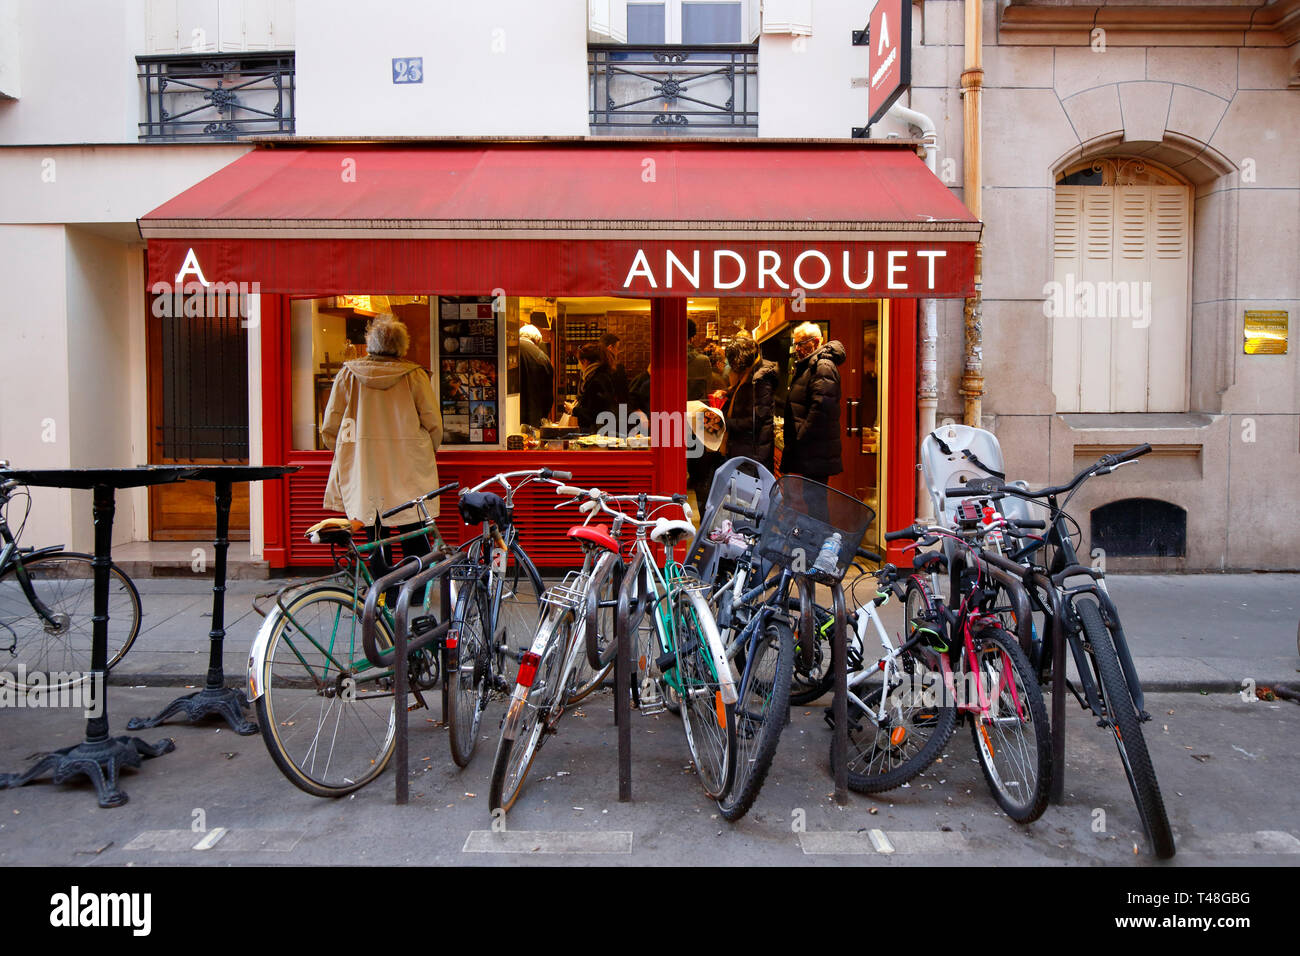 Fromagerie Androuet, 23 Rue de la Terrasse, Paris, France. exterior storefront of a cheese shop in the Villiers neighborhood. Androüet Stock Photo